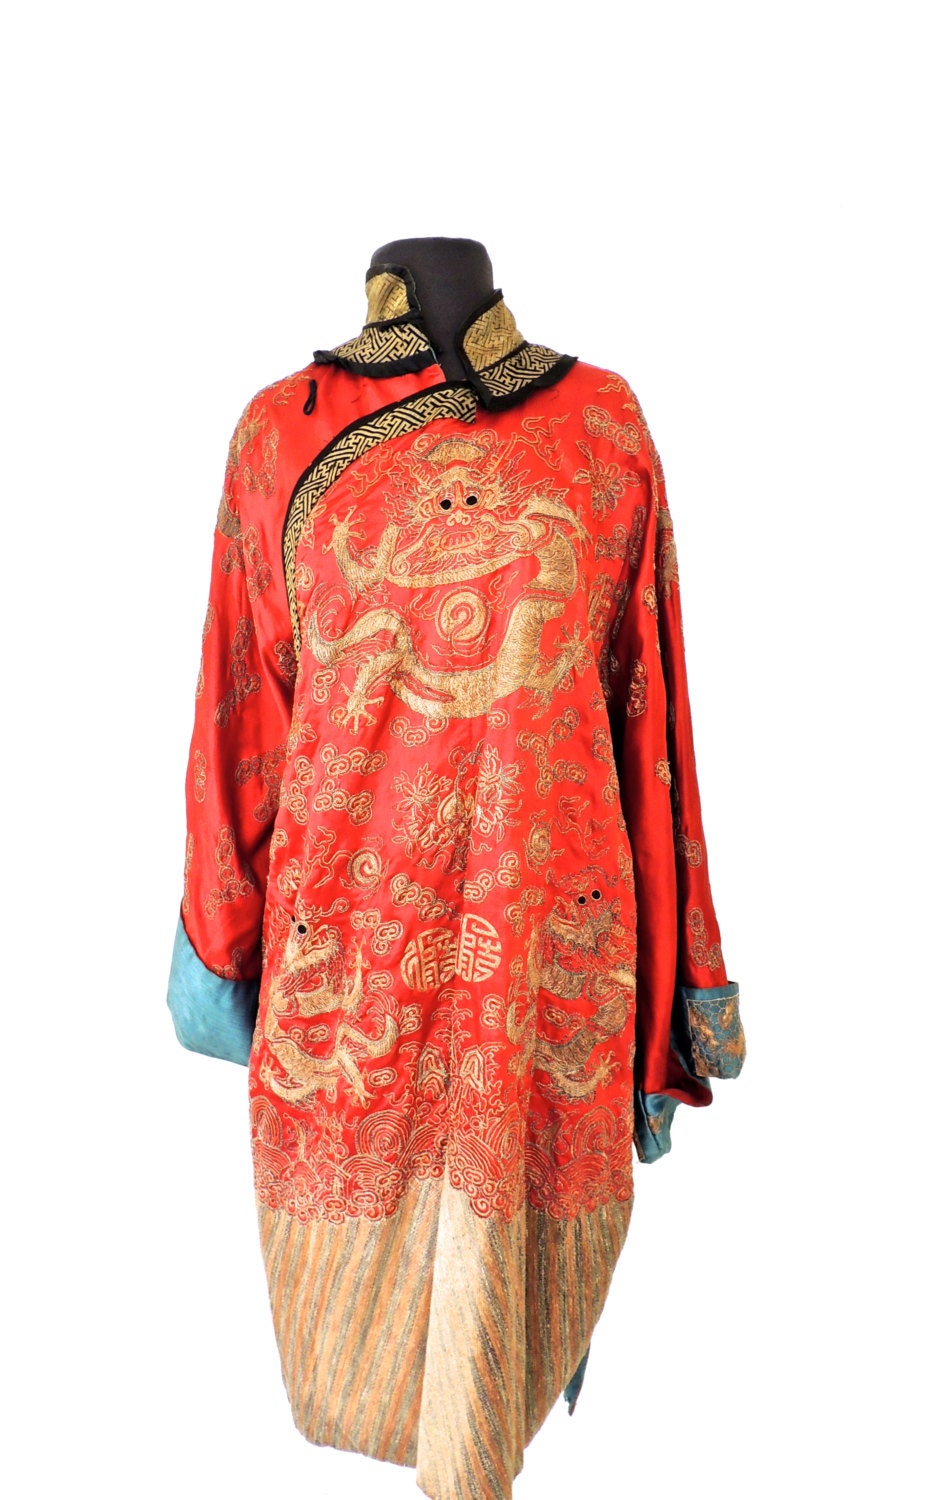 antique ceremonial kimono robe late 1800s by mkmack on Etsy